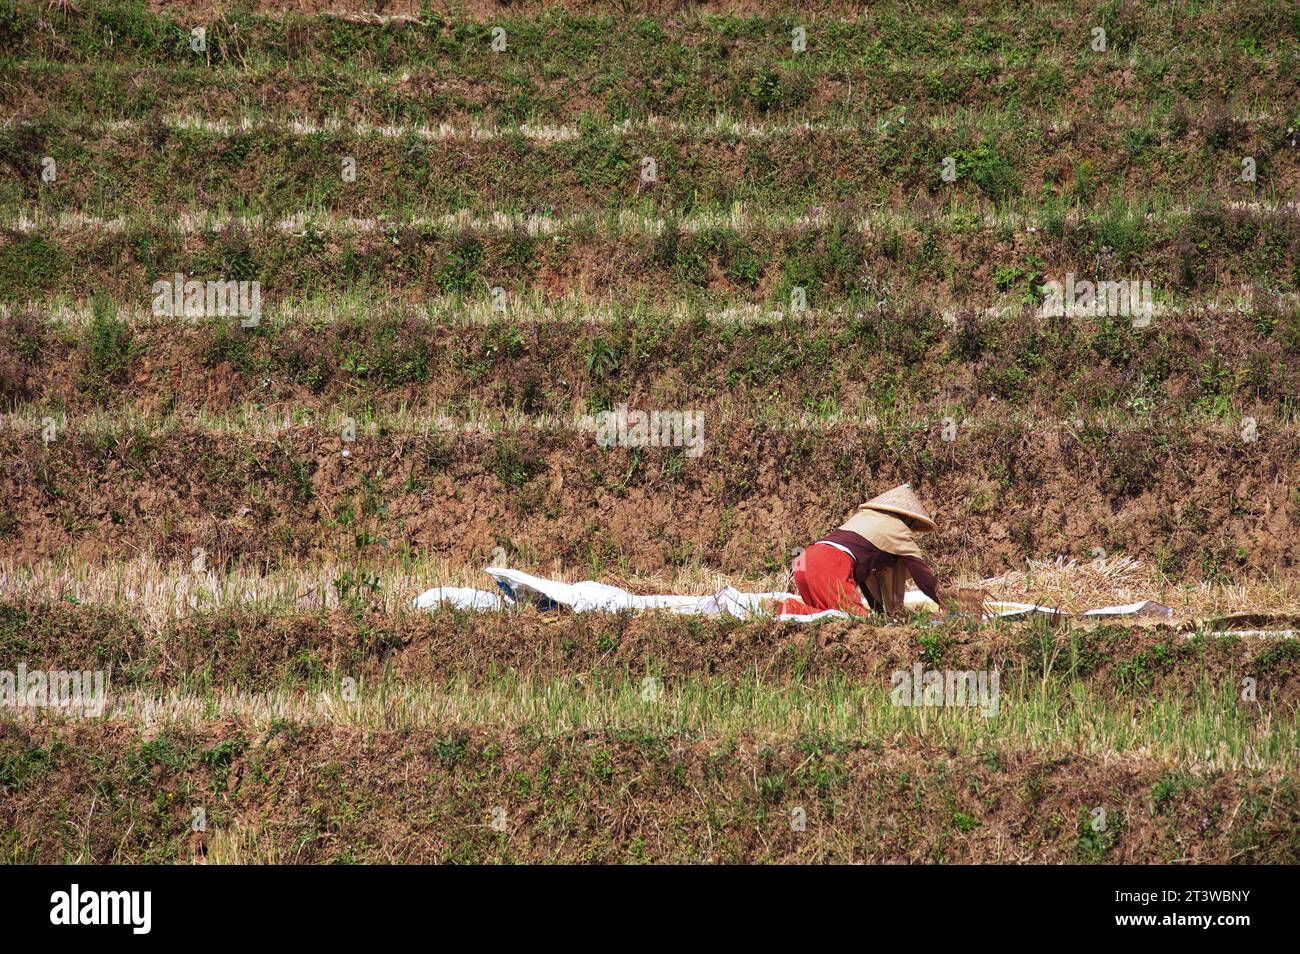 Rear view of woman with traditional hat working in rice field Stock Photo